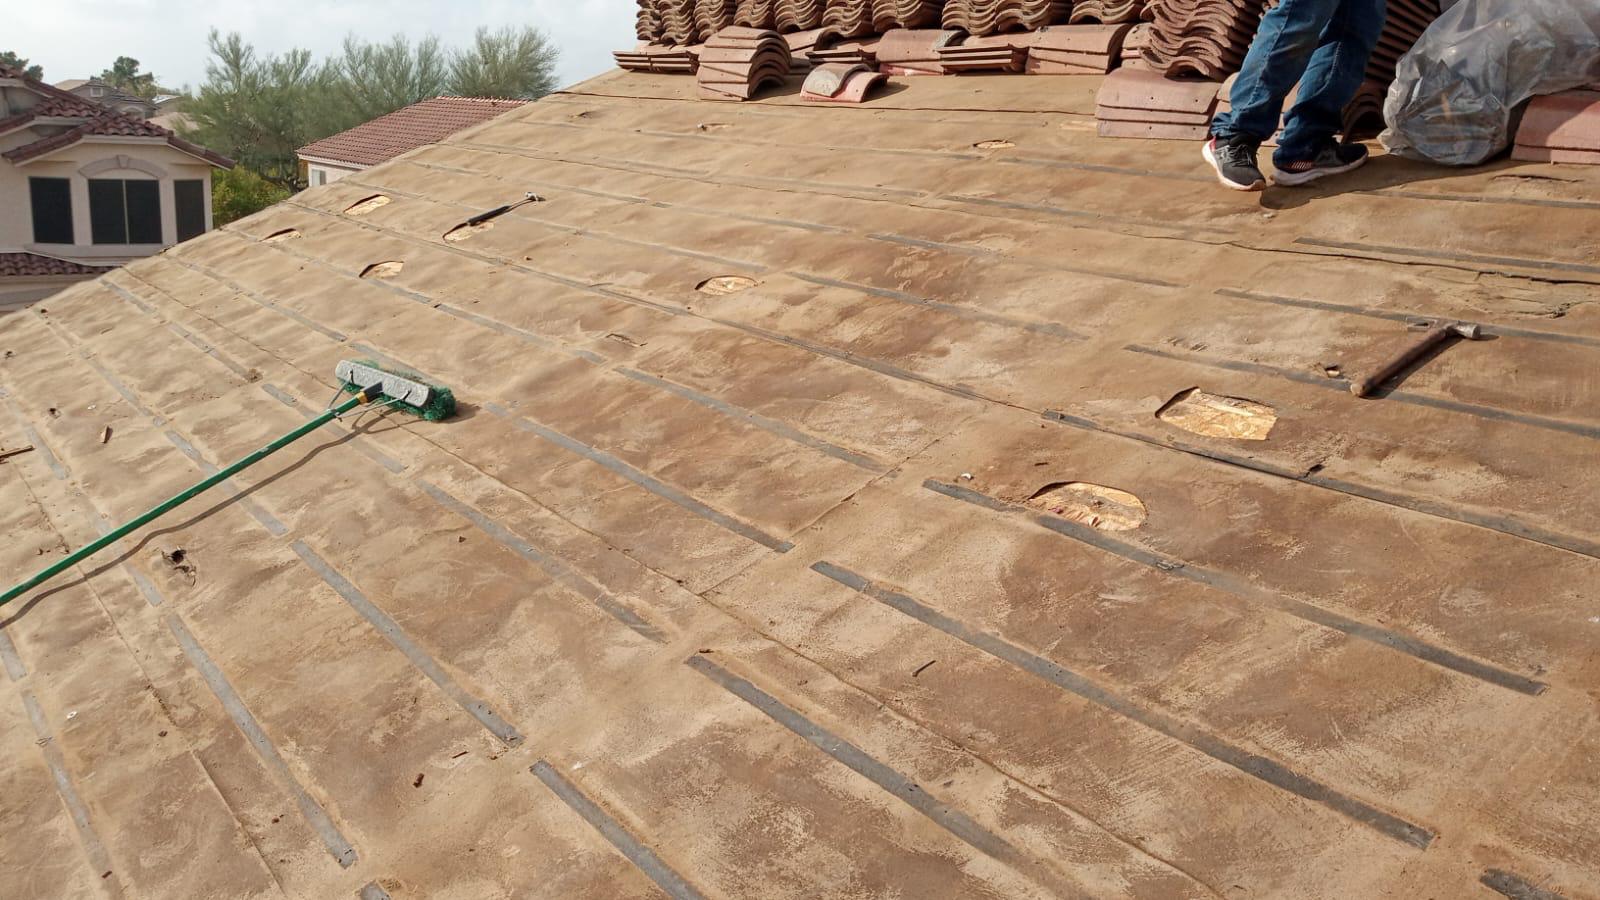 In-progress high-quality tile re-felting by roofing specialists in McCormick Ranch.